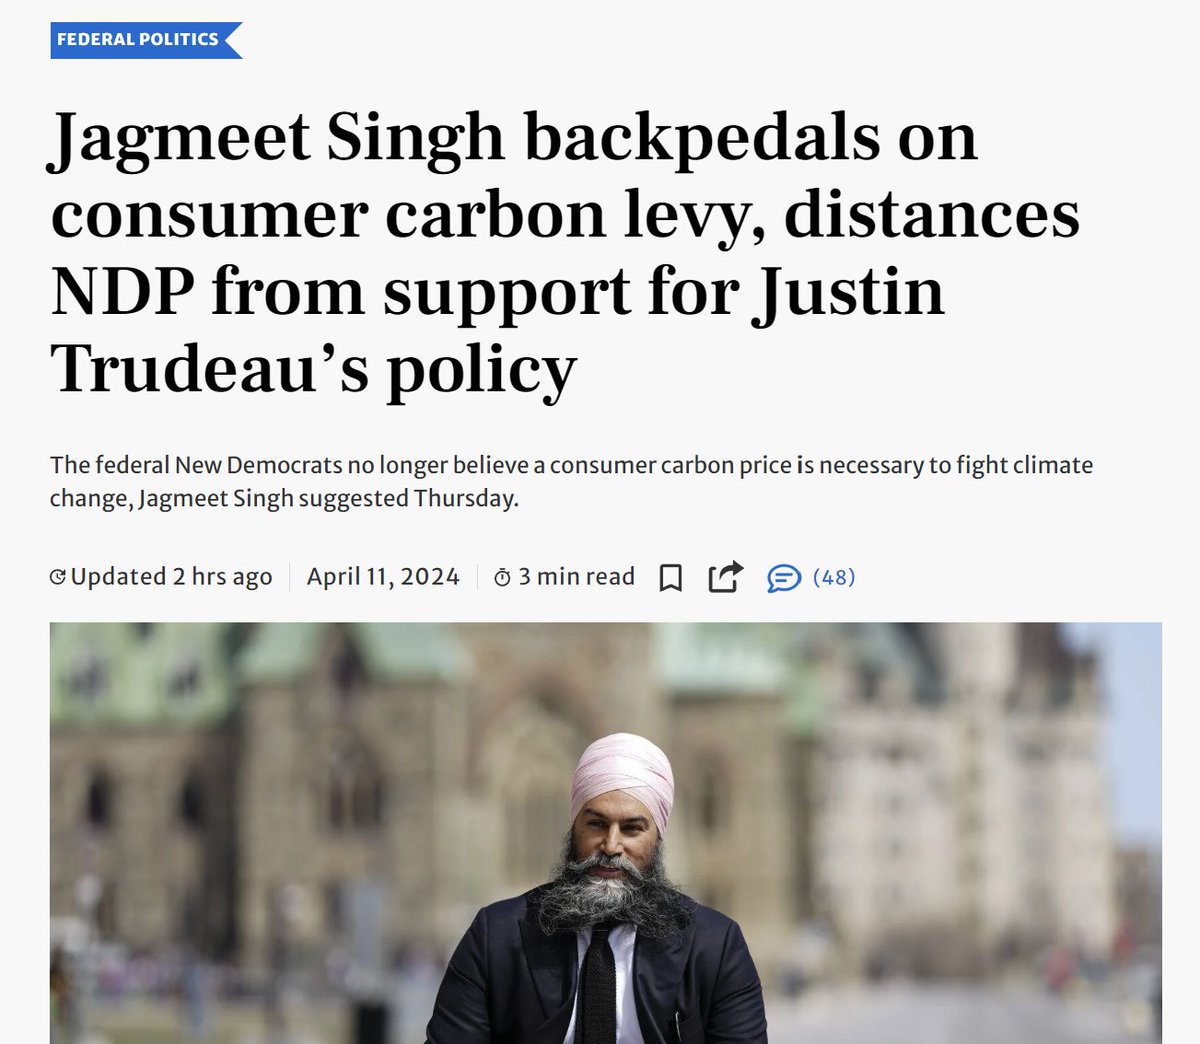 Singh flip-flopping again. How could anyone trust a party like this?